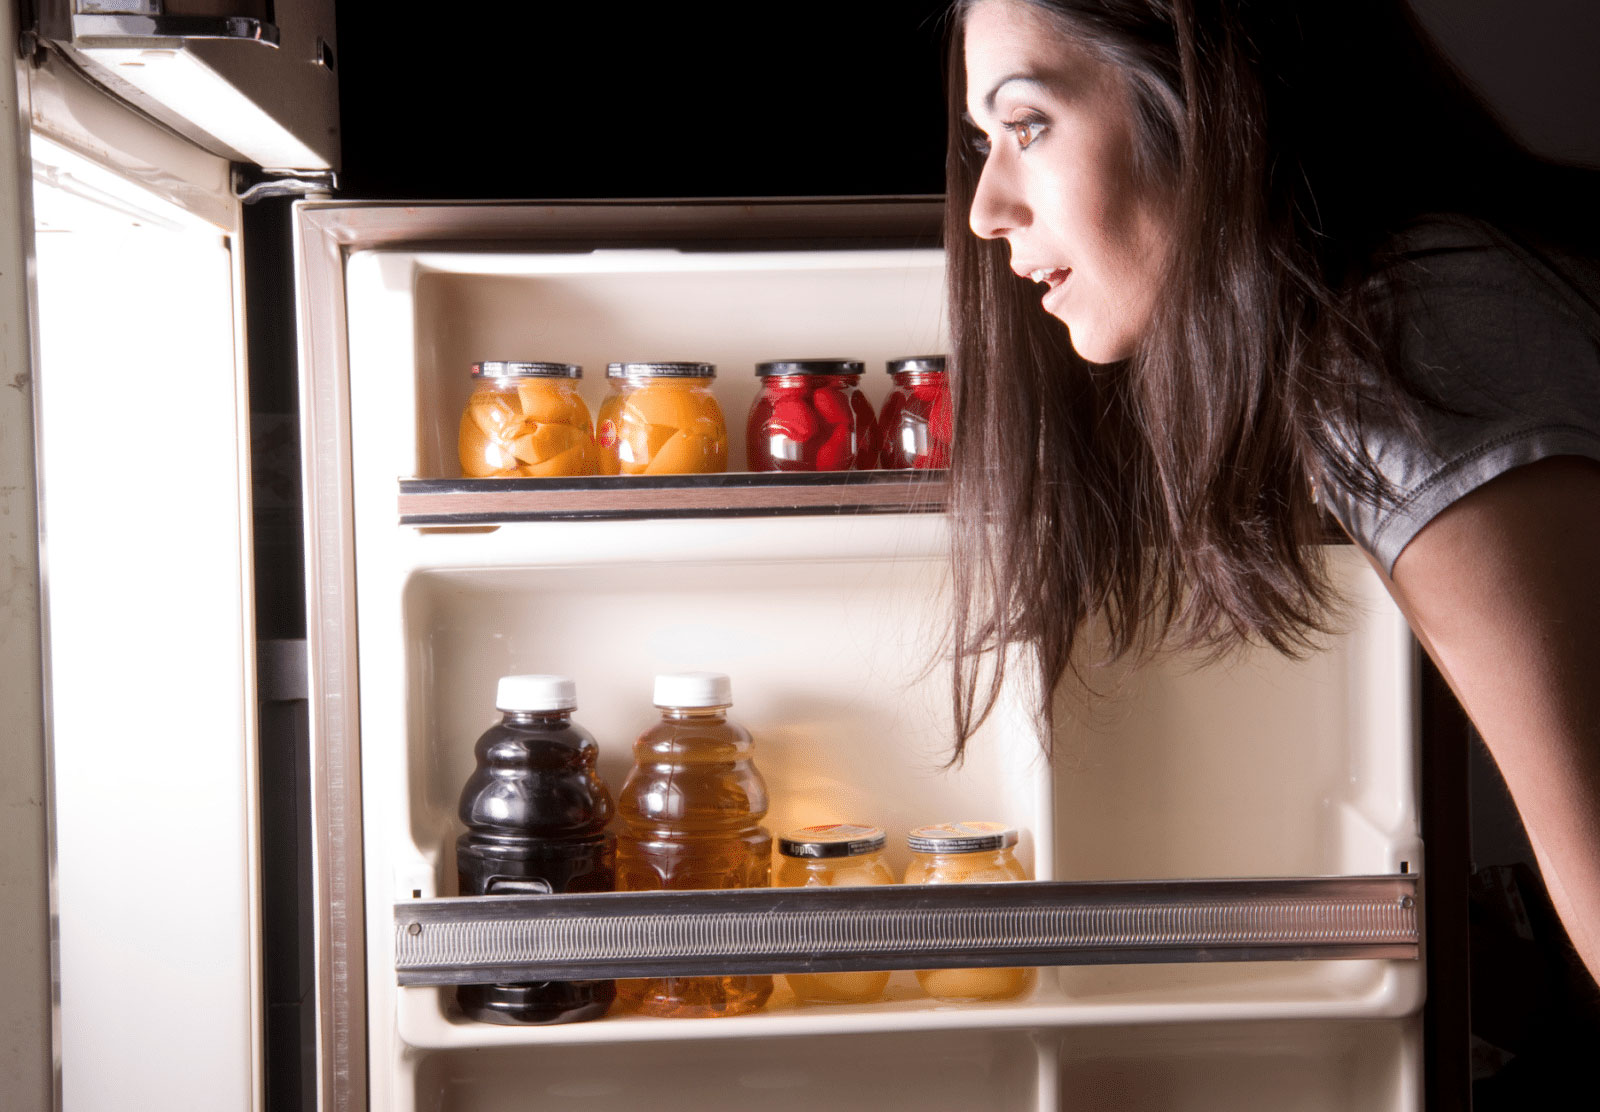 So You Think You’re Great at General Knowledge, Eh? Prove It With This Quiz Opening Fridge